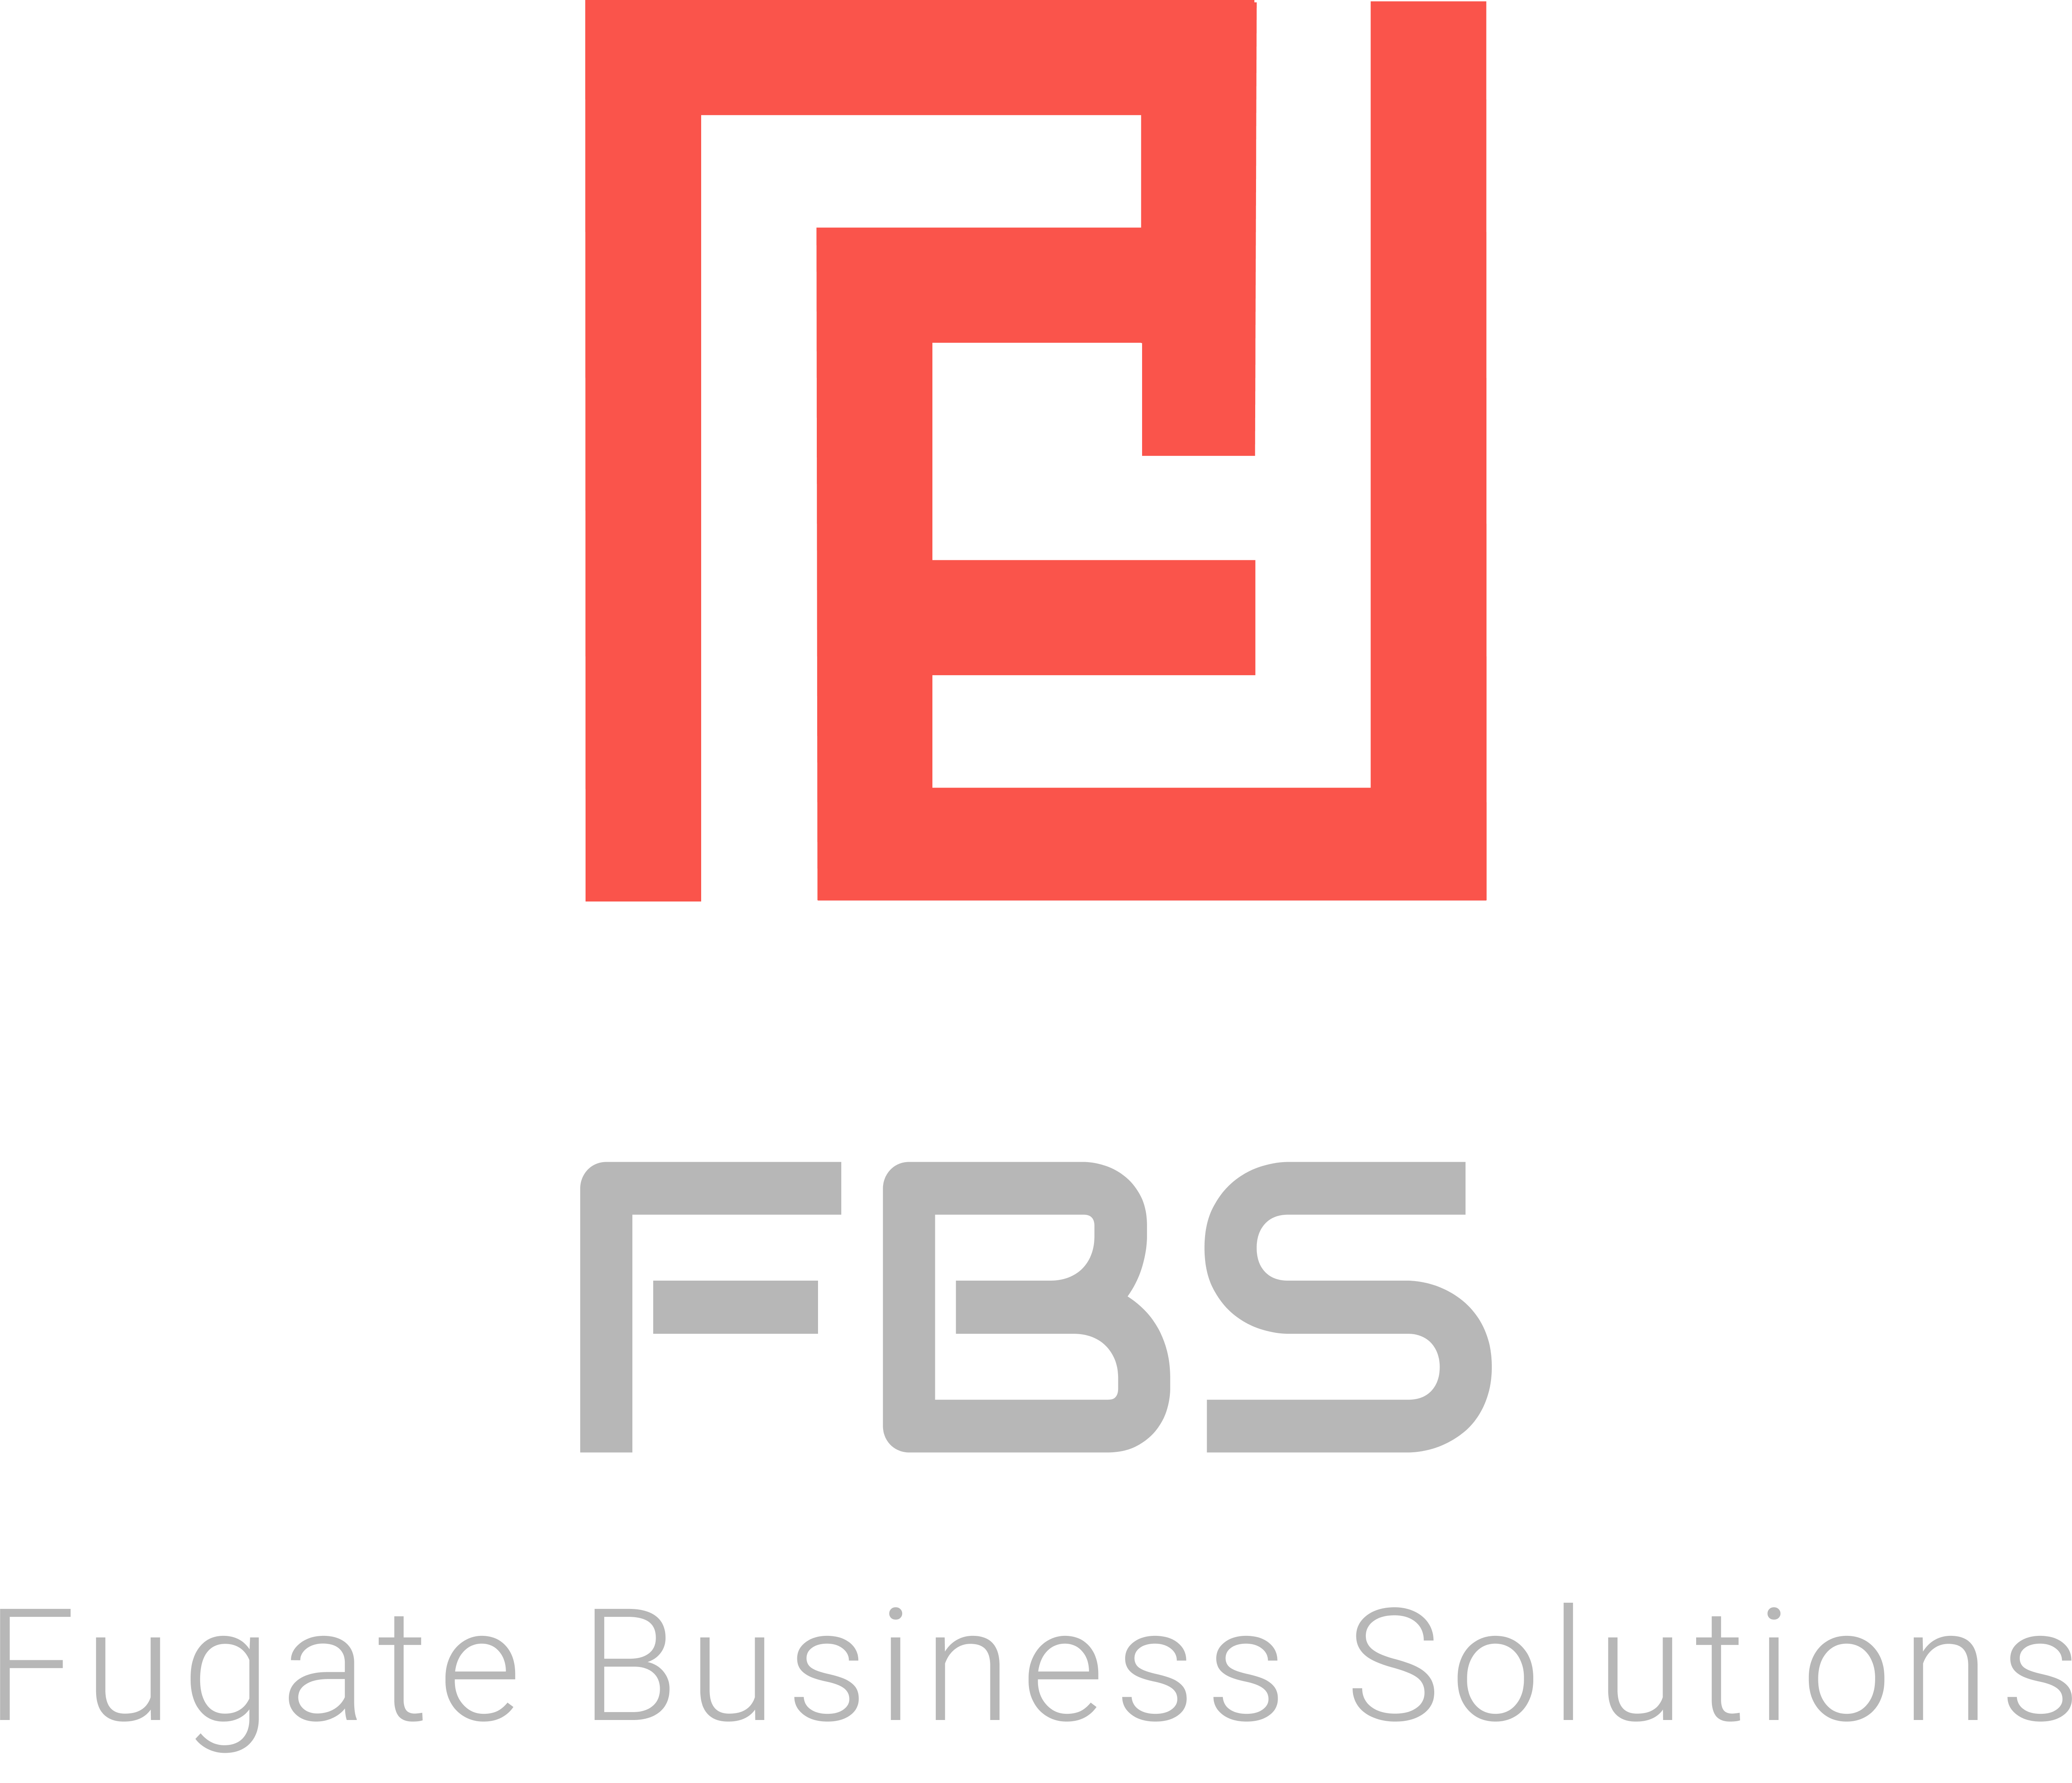 Fugate Business Solutions